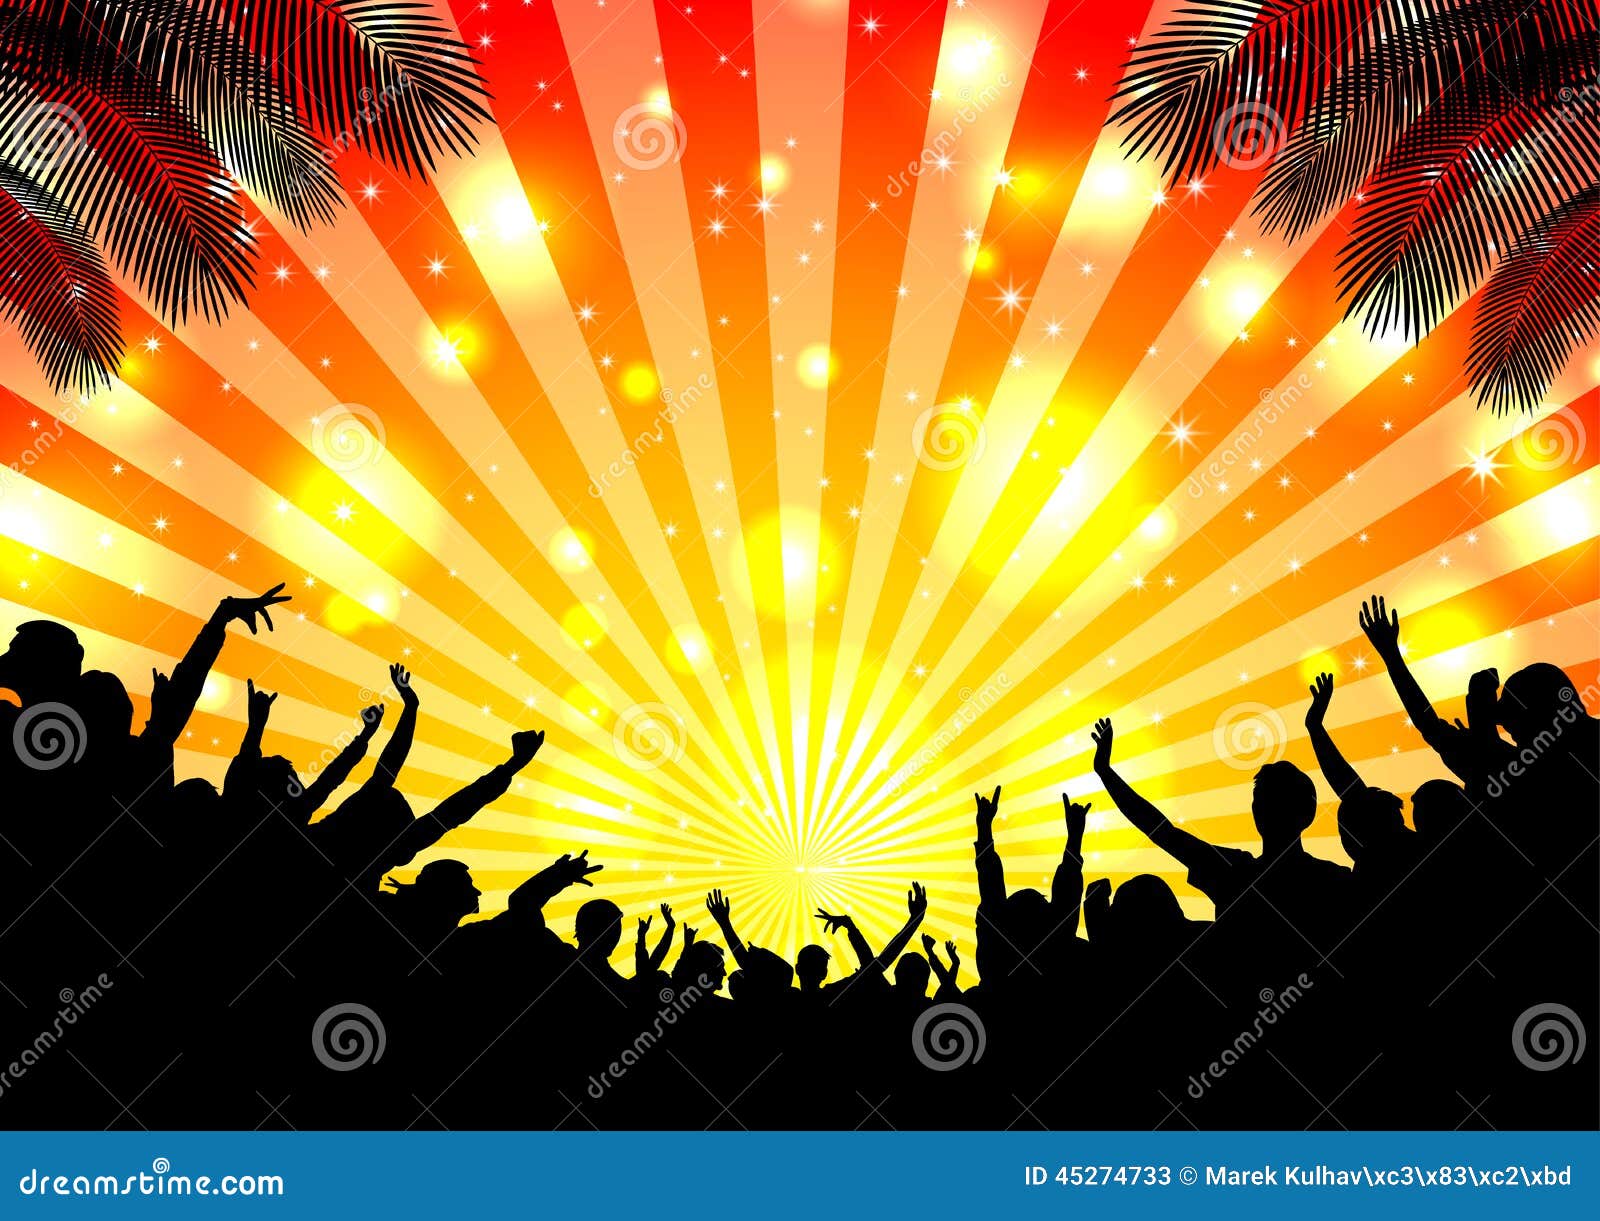 summer-music-background-vector-instruments-place-your-text-45274733.jpg